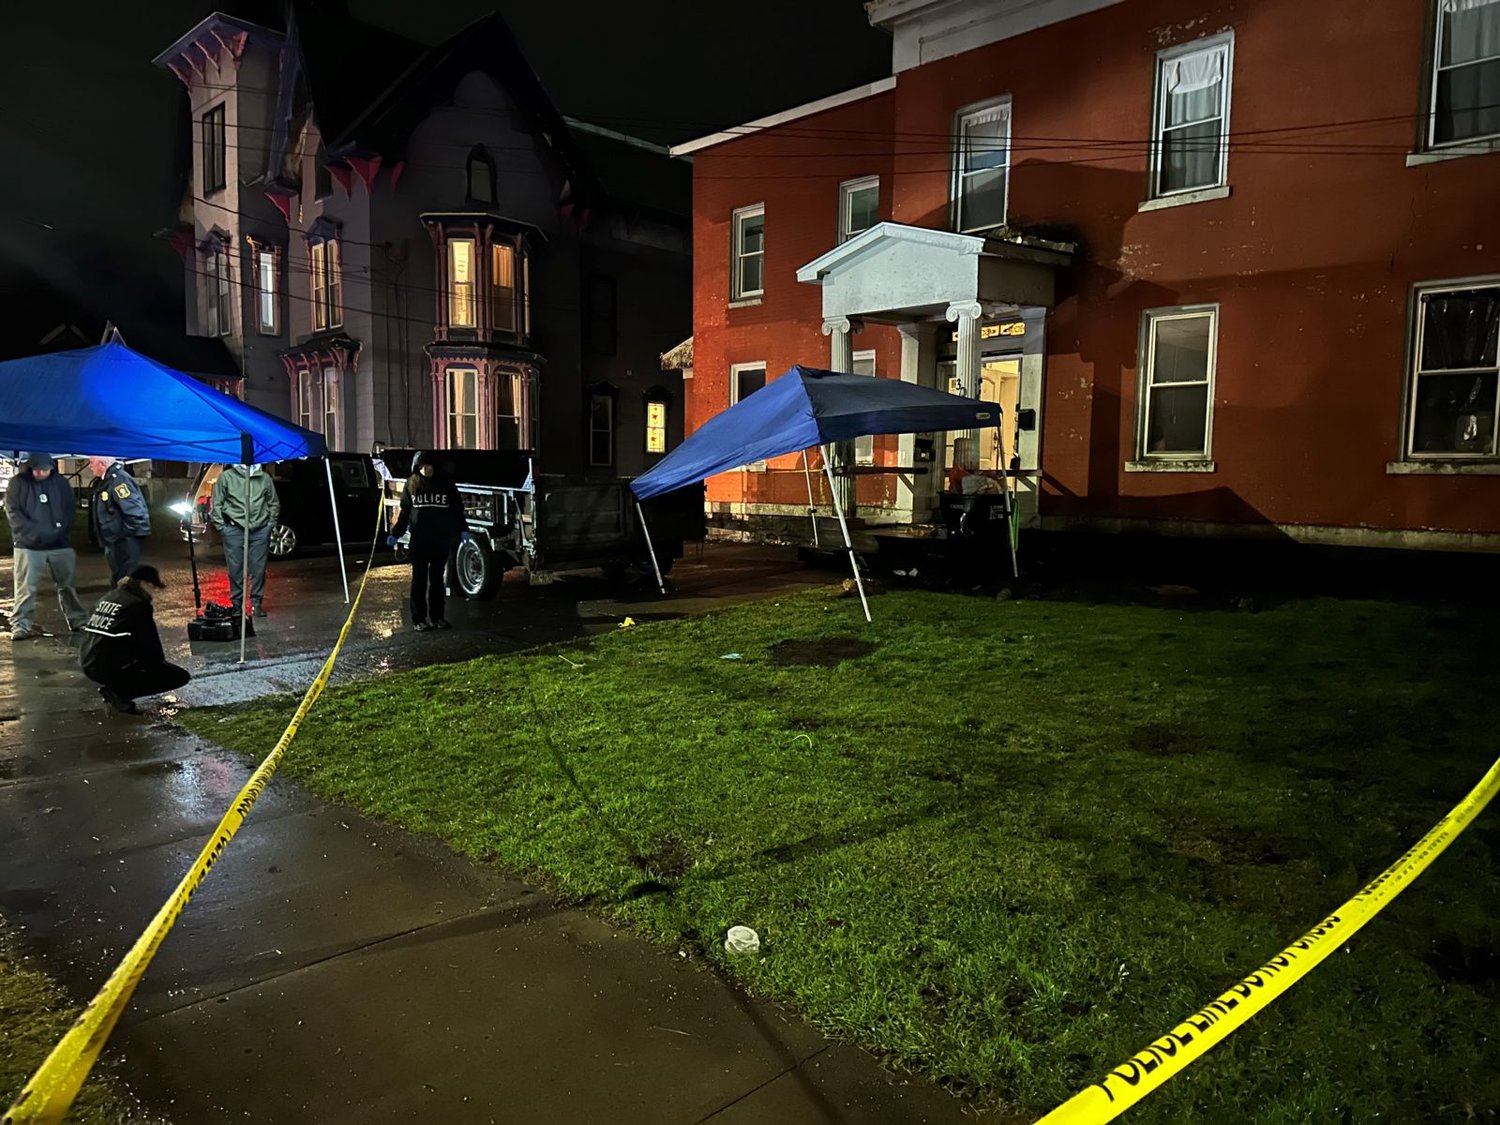 Investigators work outside a residence on East Main Street in the village of Mohawk on Wednesday, January 4, after one woman stabbed her neighbor multiple times in the chest, according to New York State Police. The victim was rushed to a local hospital where she later succumbed to her injuries, and the accused attacker has been charged with attempted murder. Updated charges are likely.